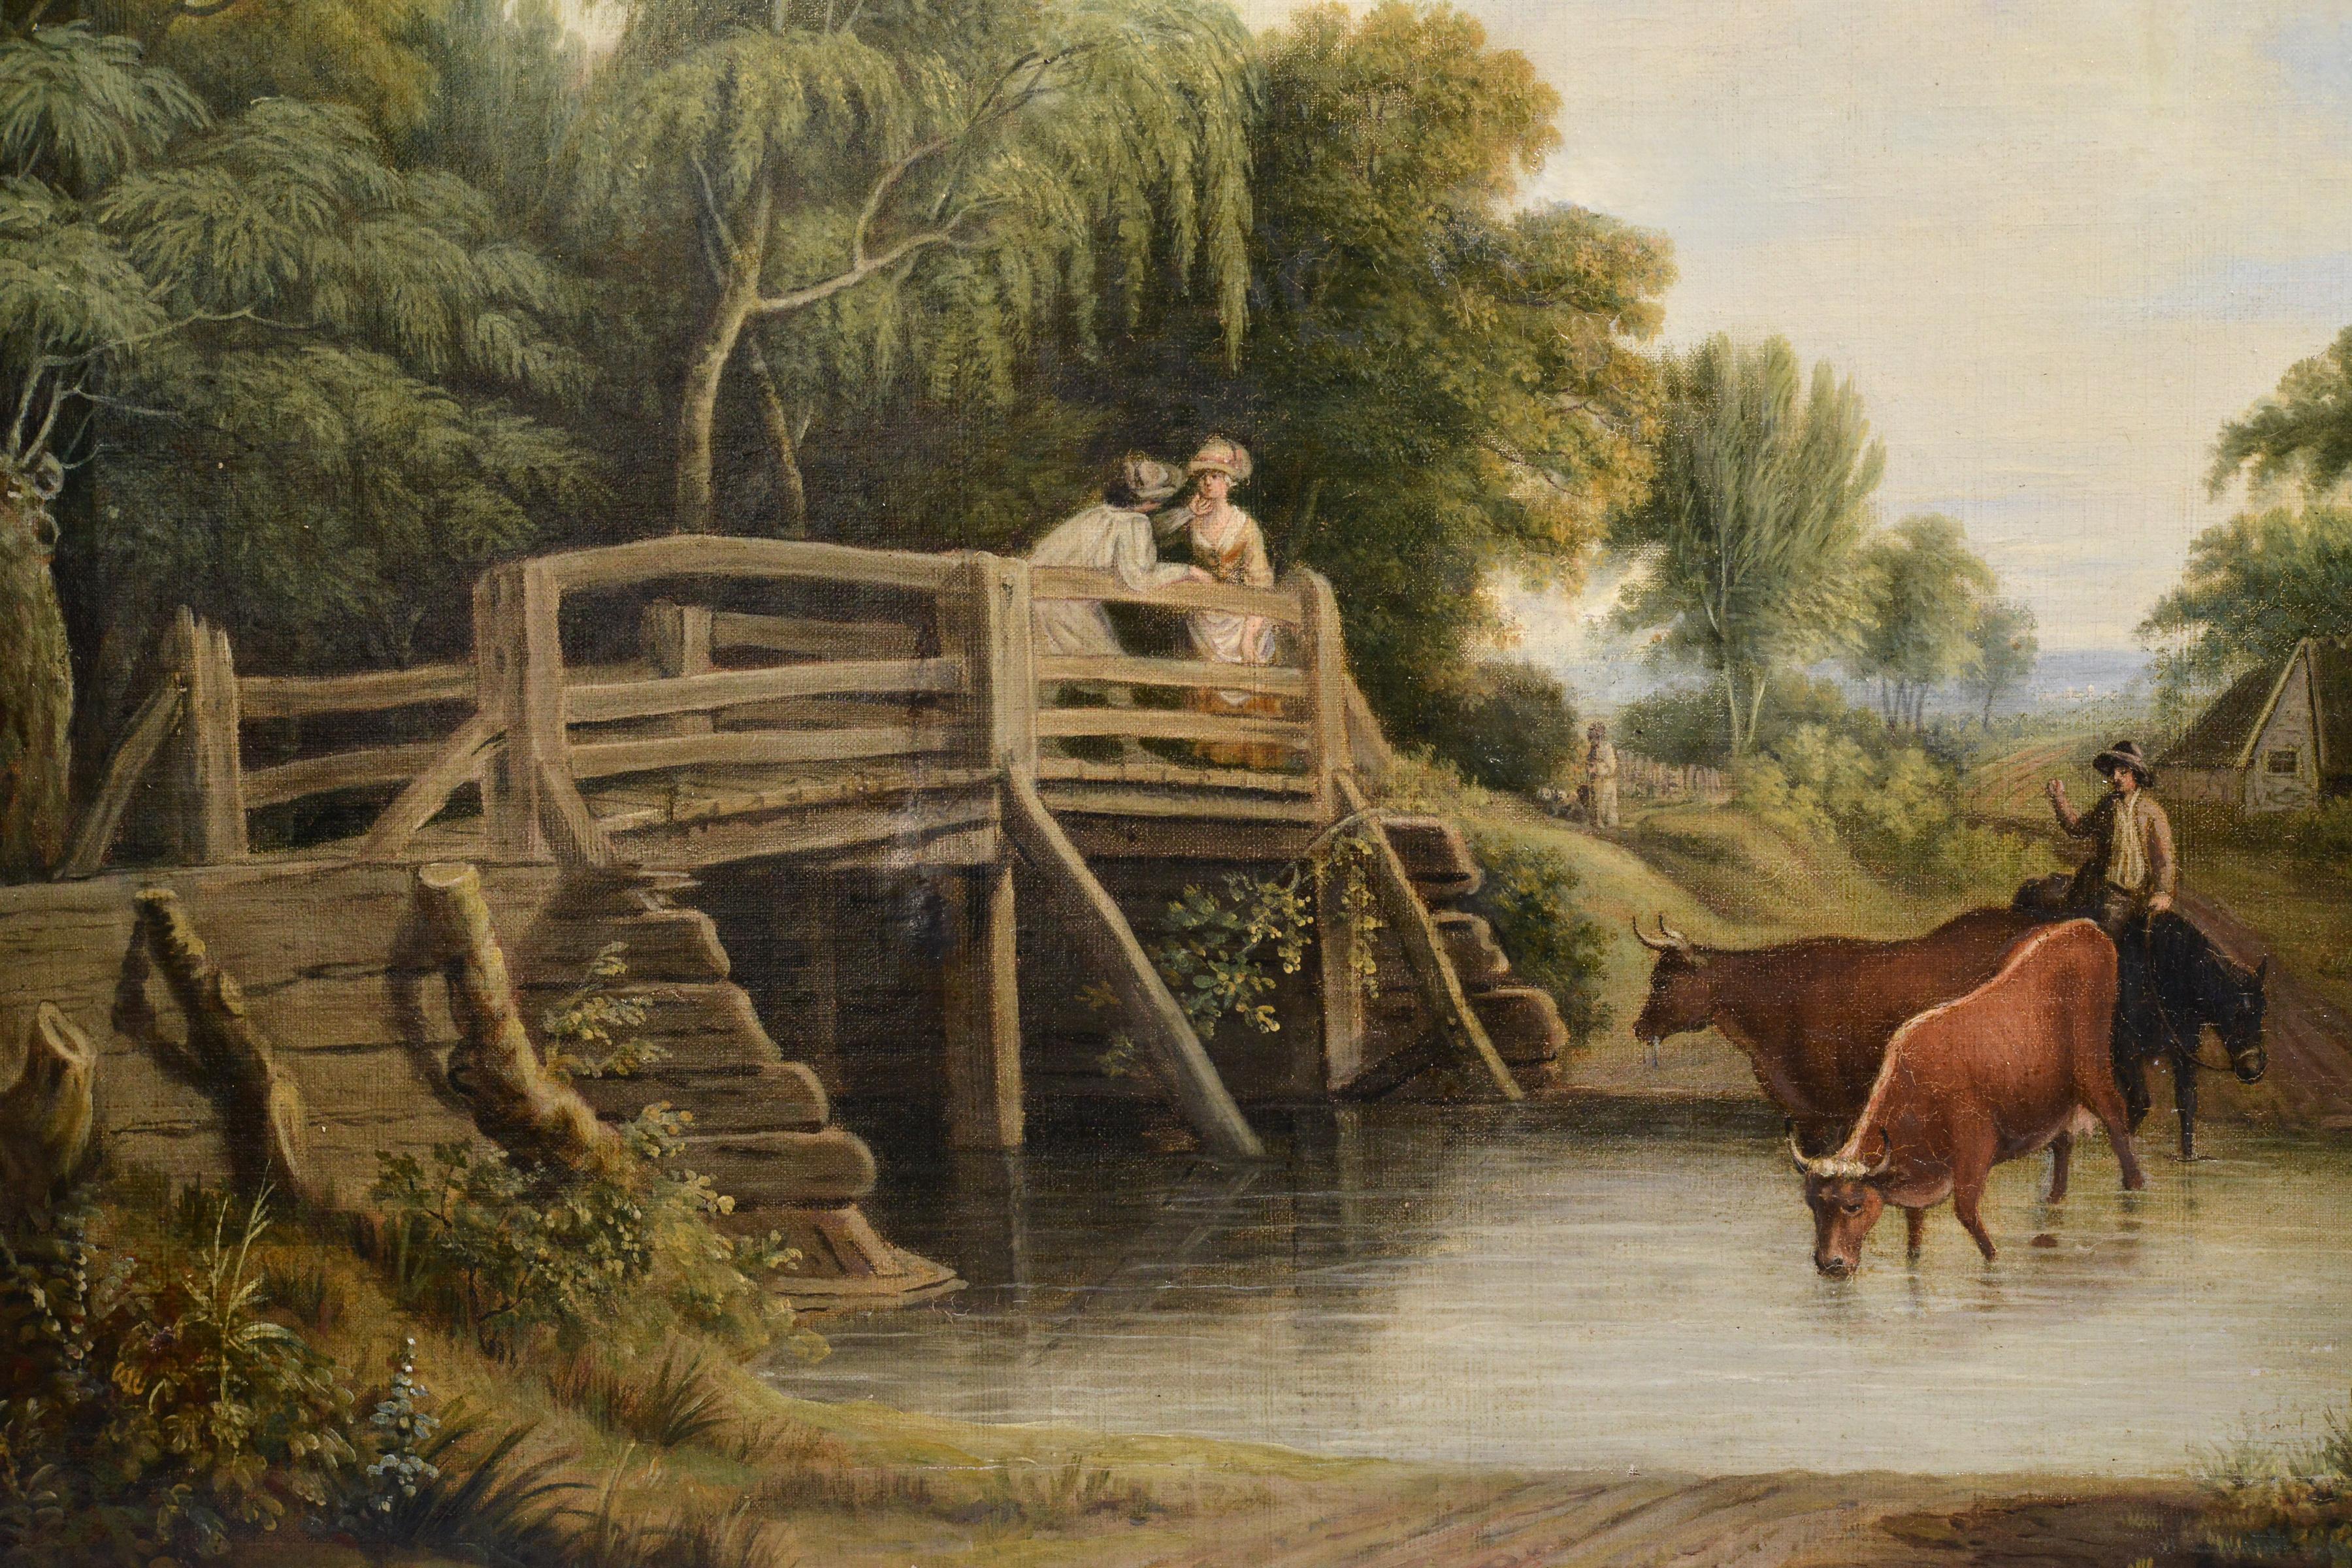 Summer rustic scene depicts an idyllic picture of country life in which harmony and happiness reign. The muted, slightly blurry colors convey the artist's inner world and mood, while the harmonious coexistence of people and nature reminds us of the